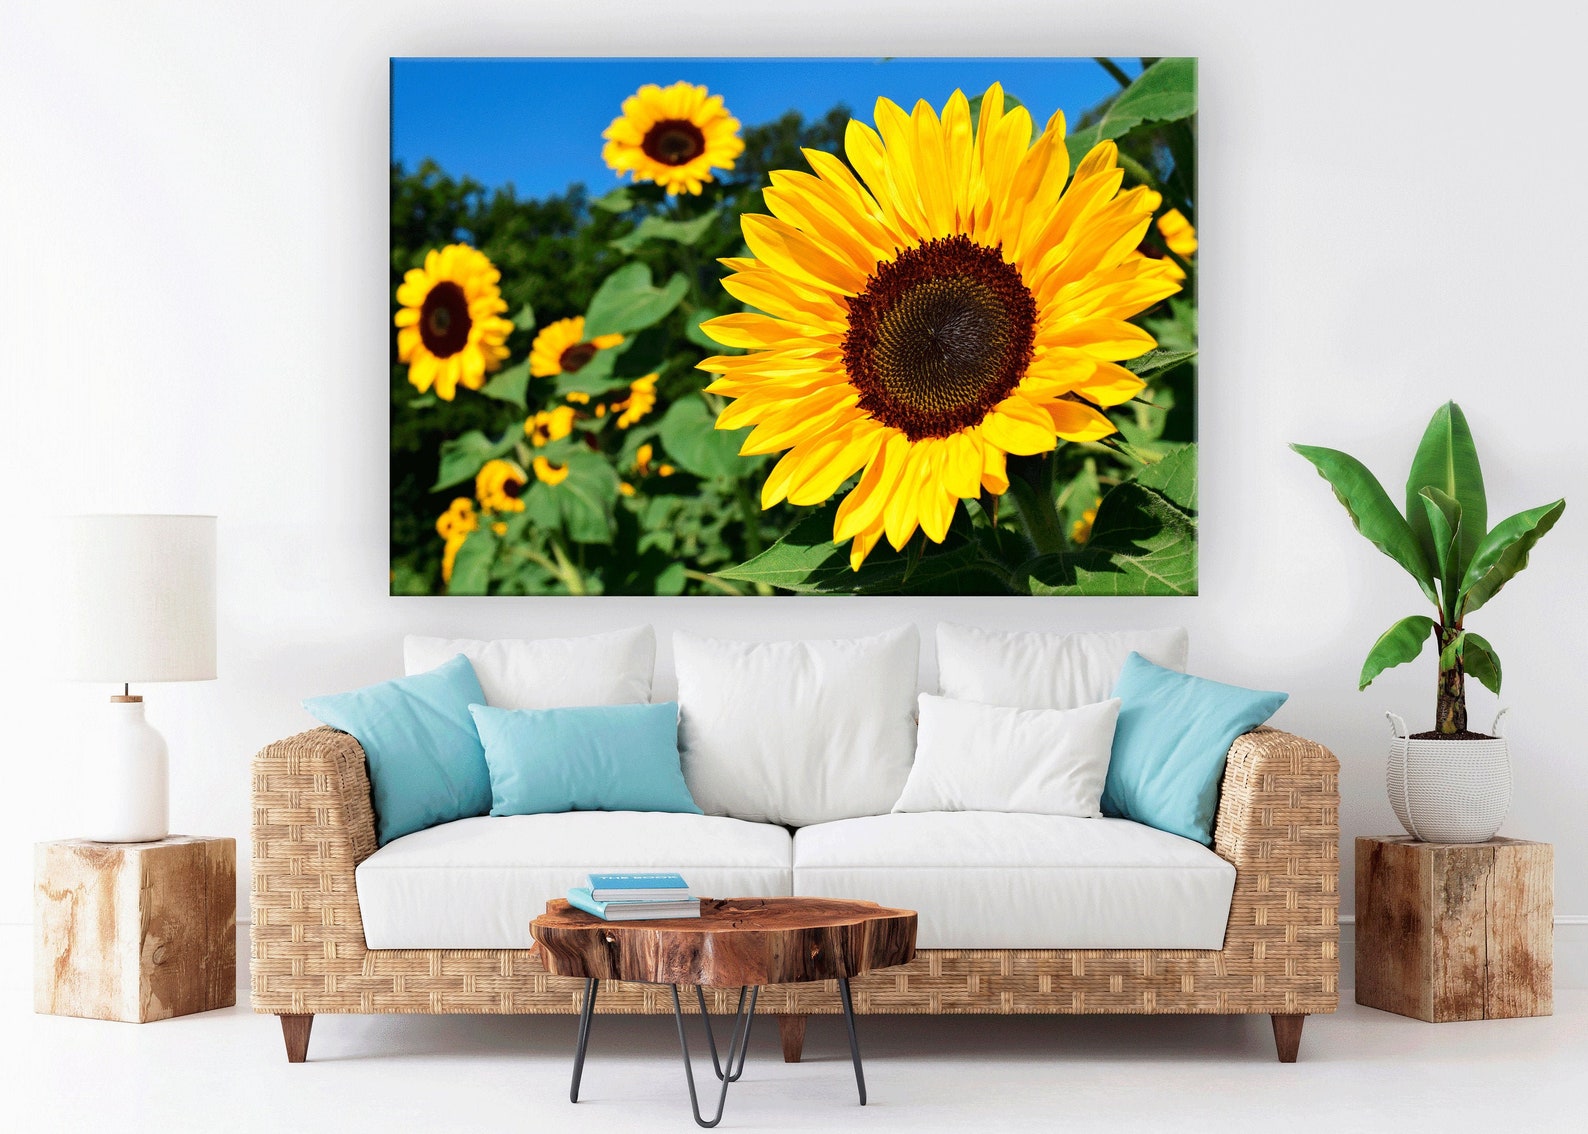 Sunflowers Painting Canvas Wall Art Sunflowers Canvas | Etsy